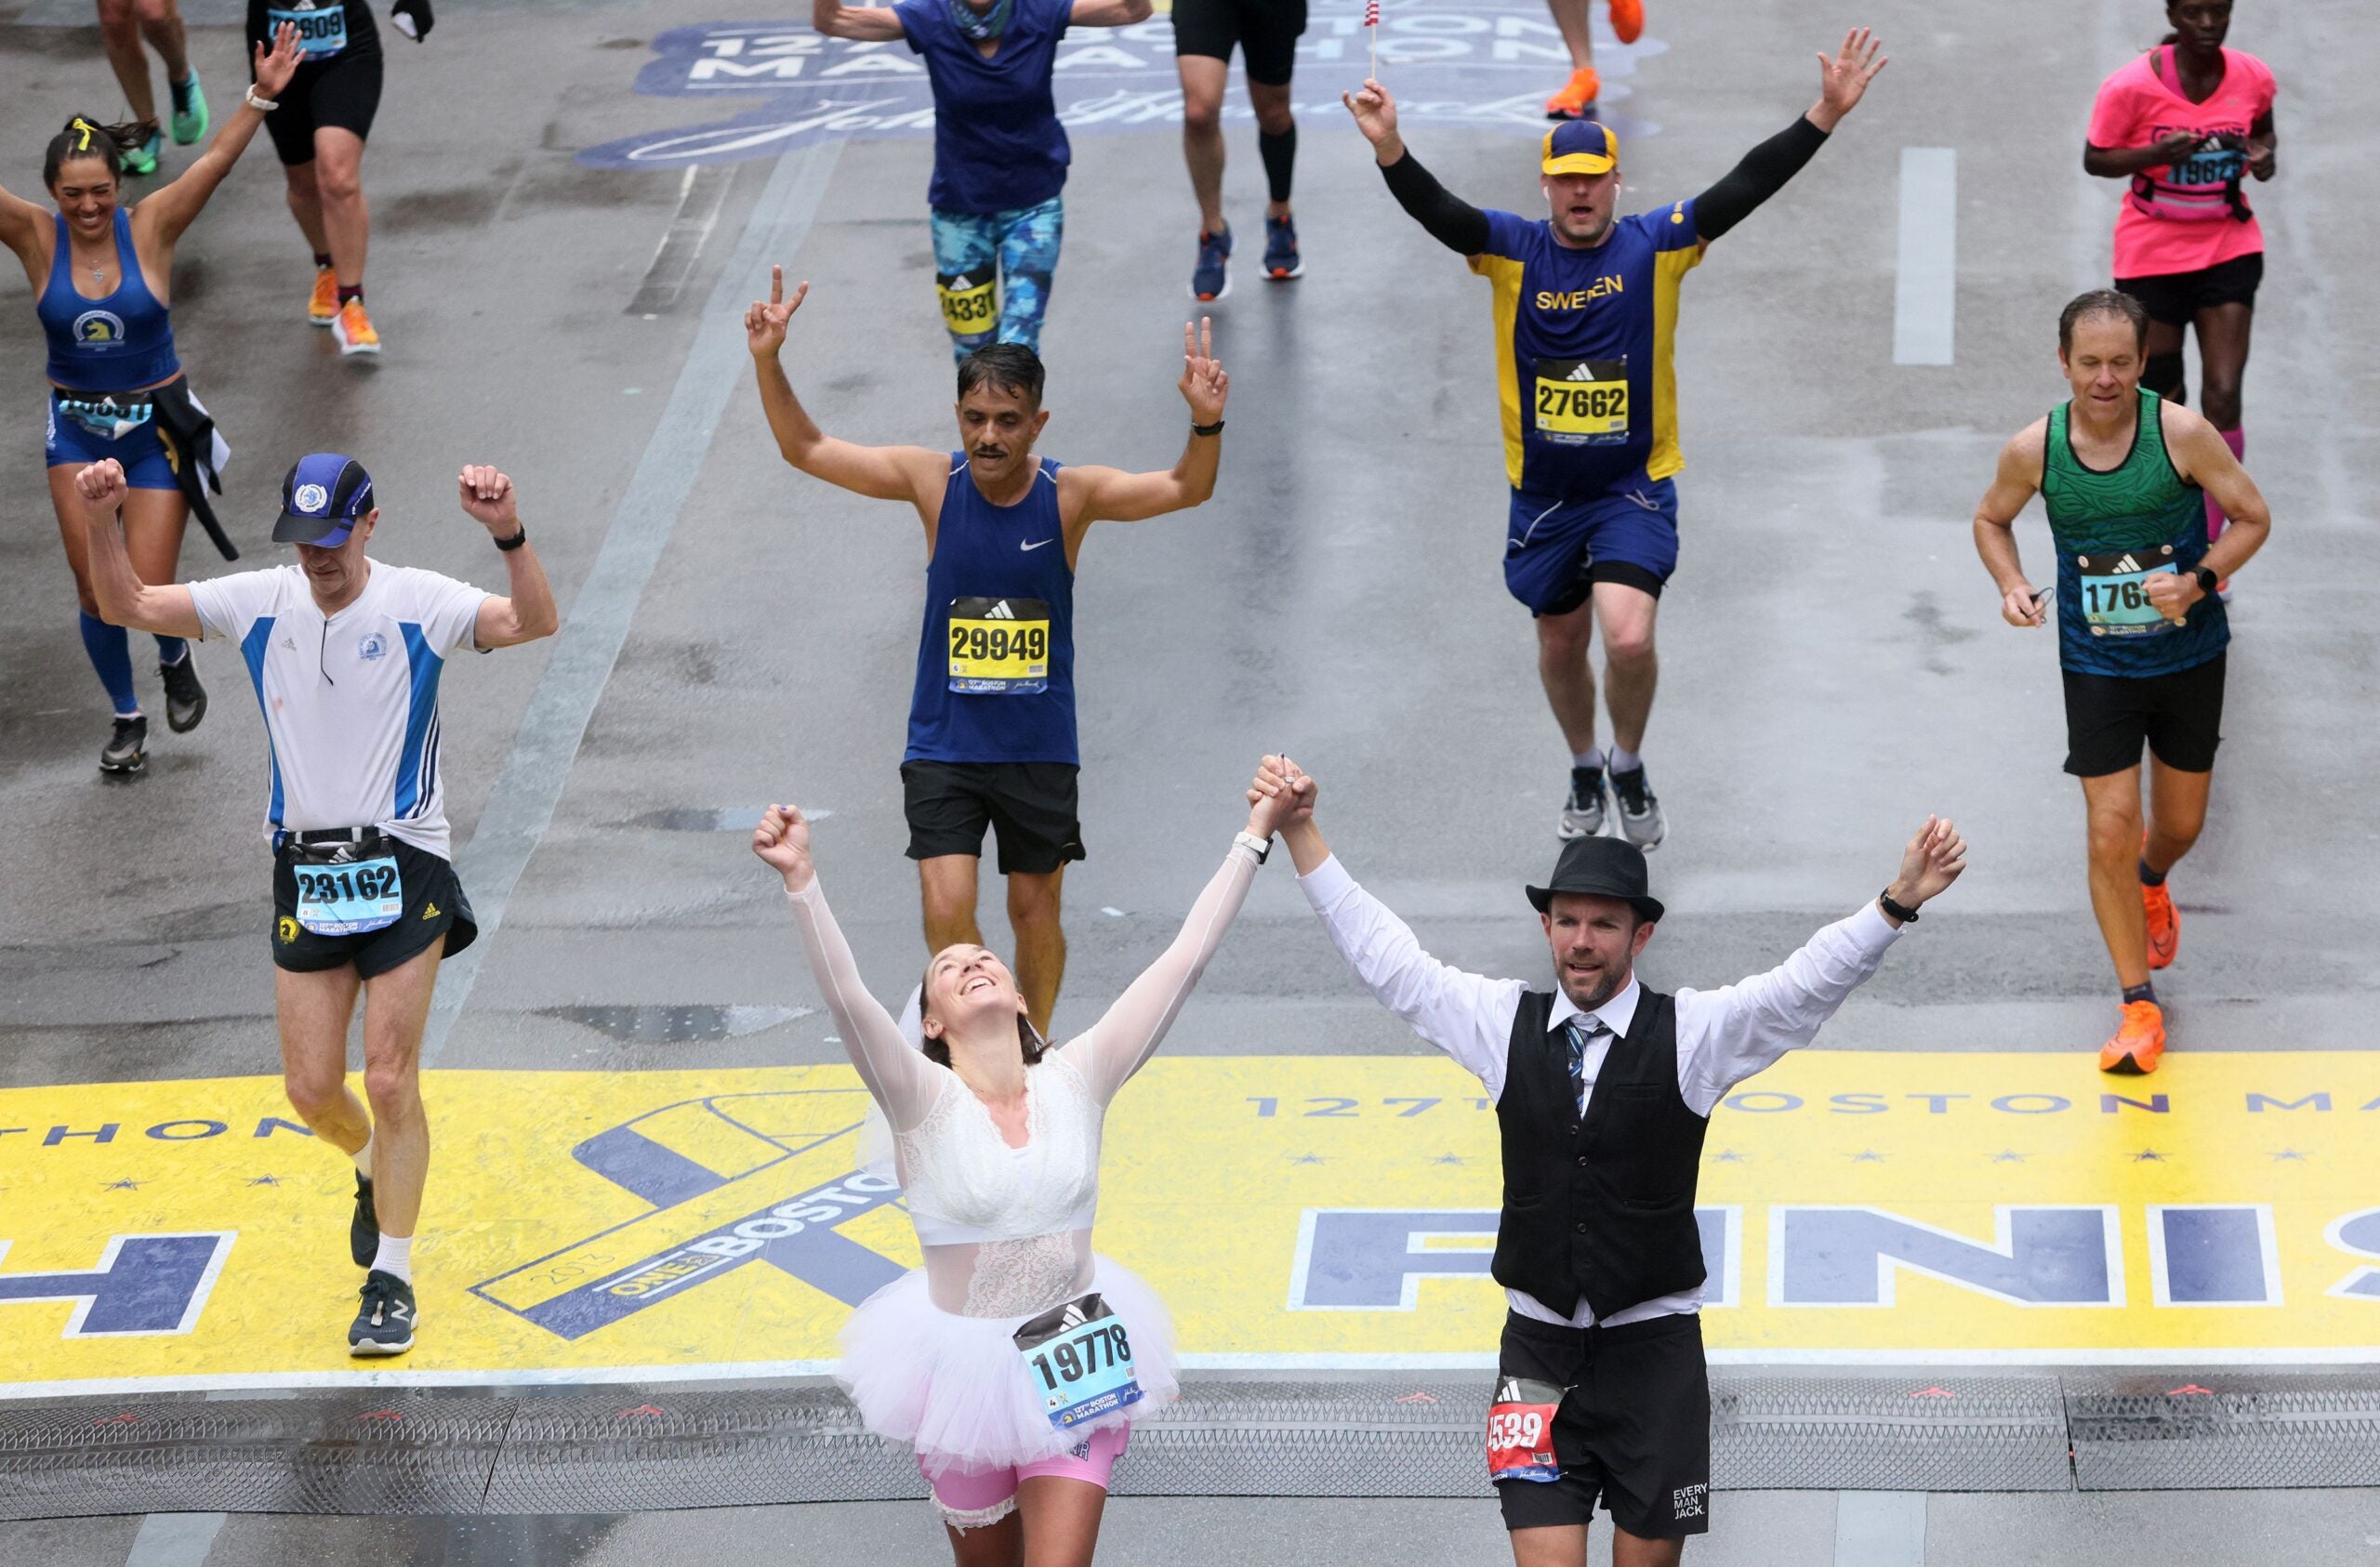 Runners celebrate as they cross the Finish Line of the Boston Marathon on the ten year anniversary of the Marathon bombing.